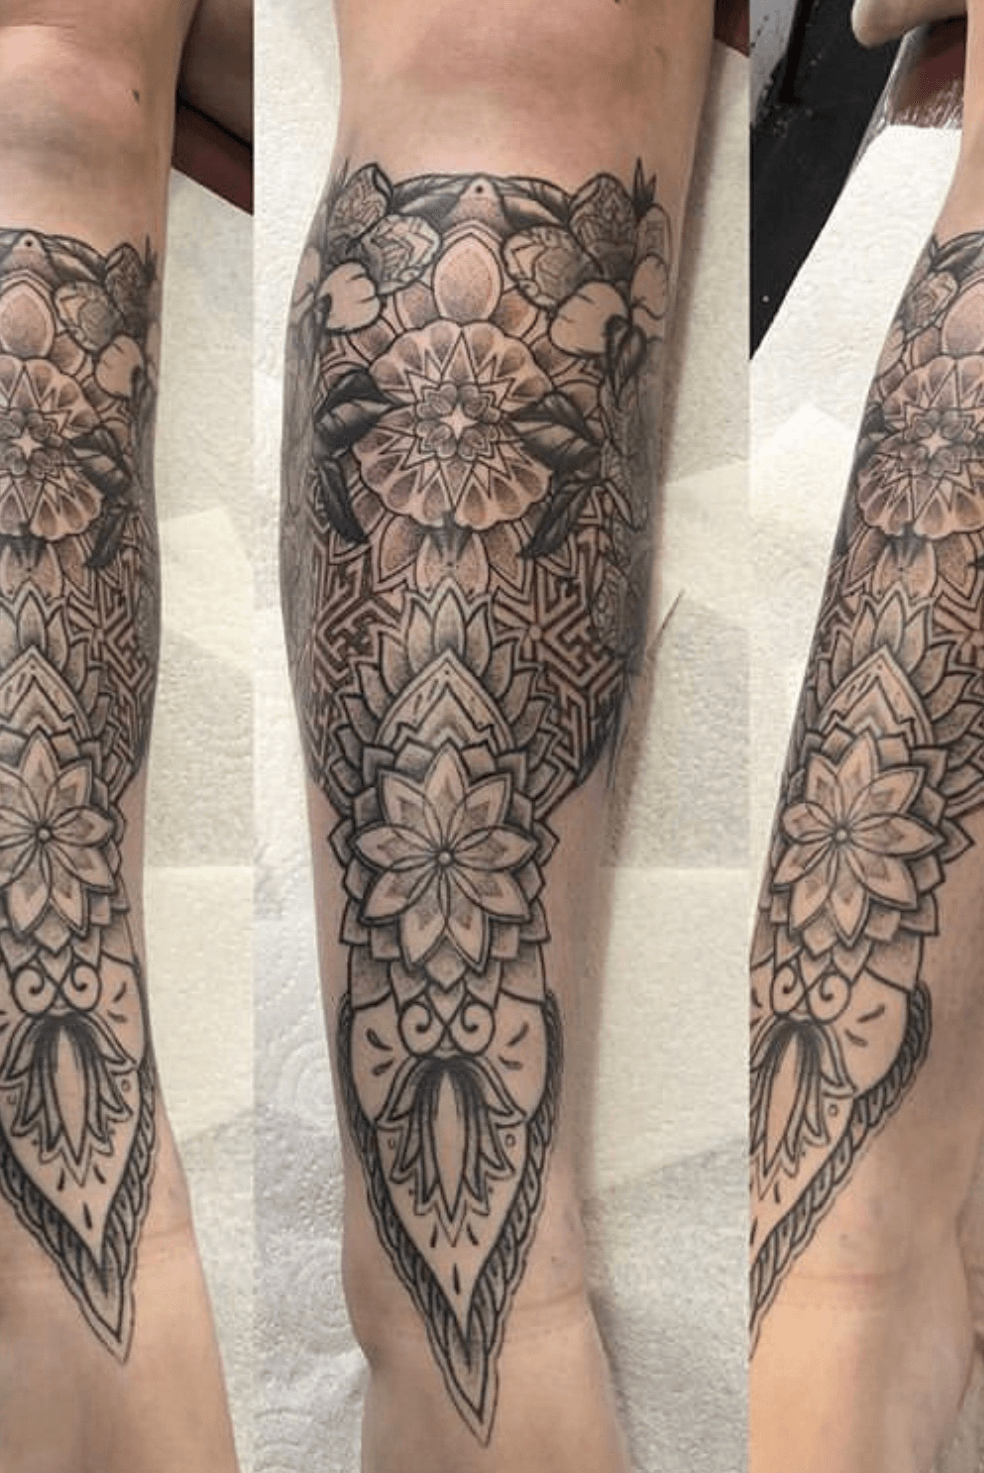 Tattoo uploaded by Sophie Sparrow • Ongoing dot work leg sleeve • Tattoodo